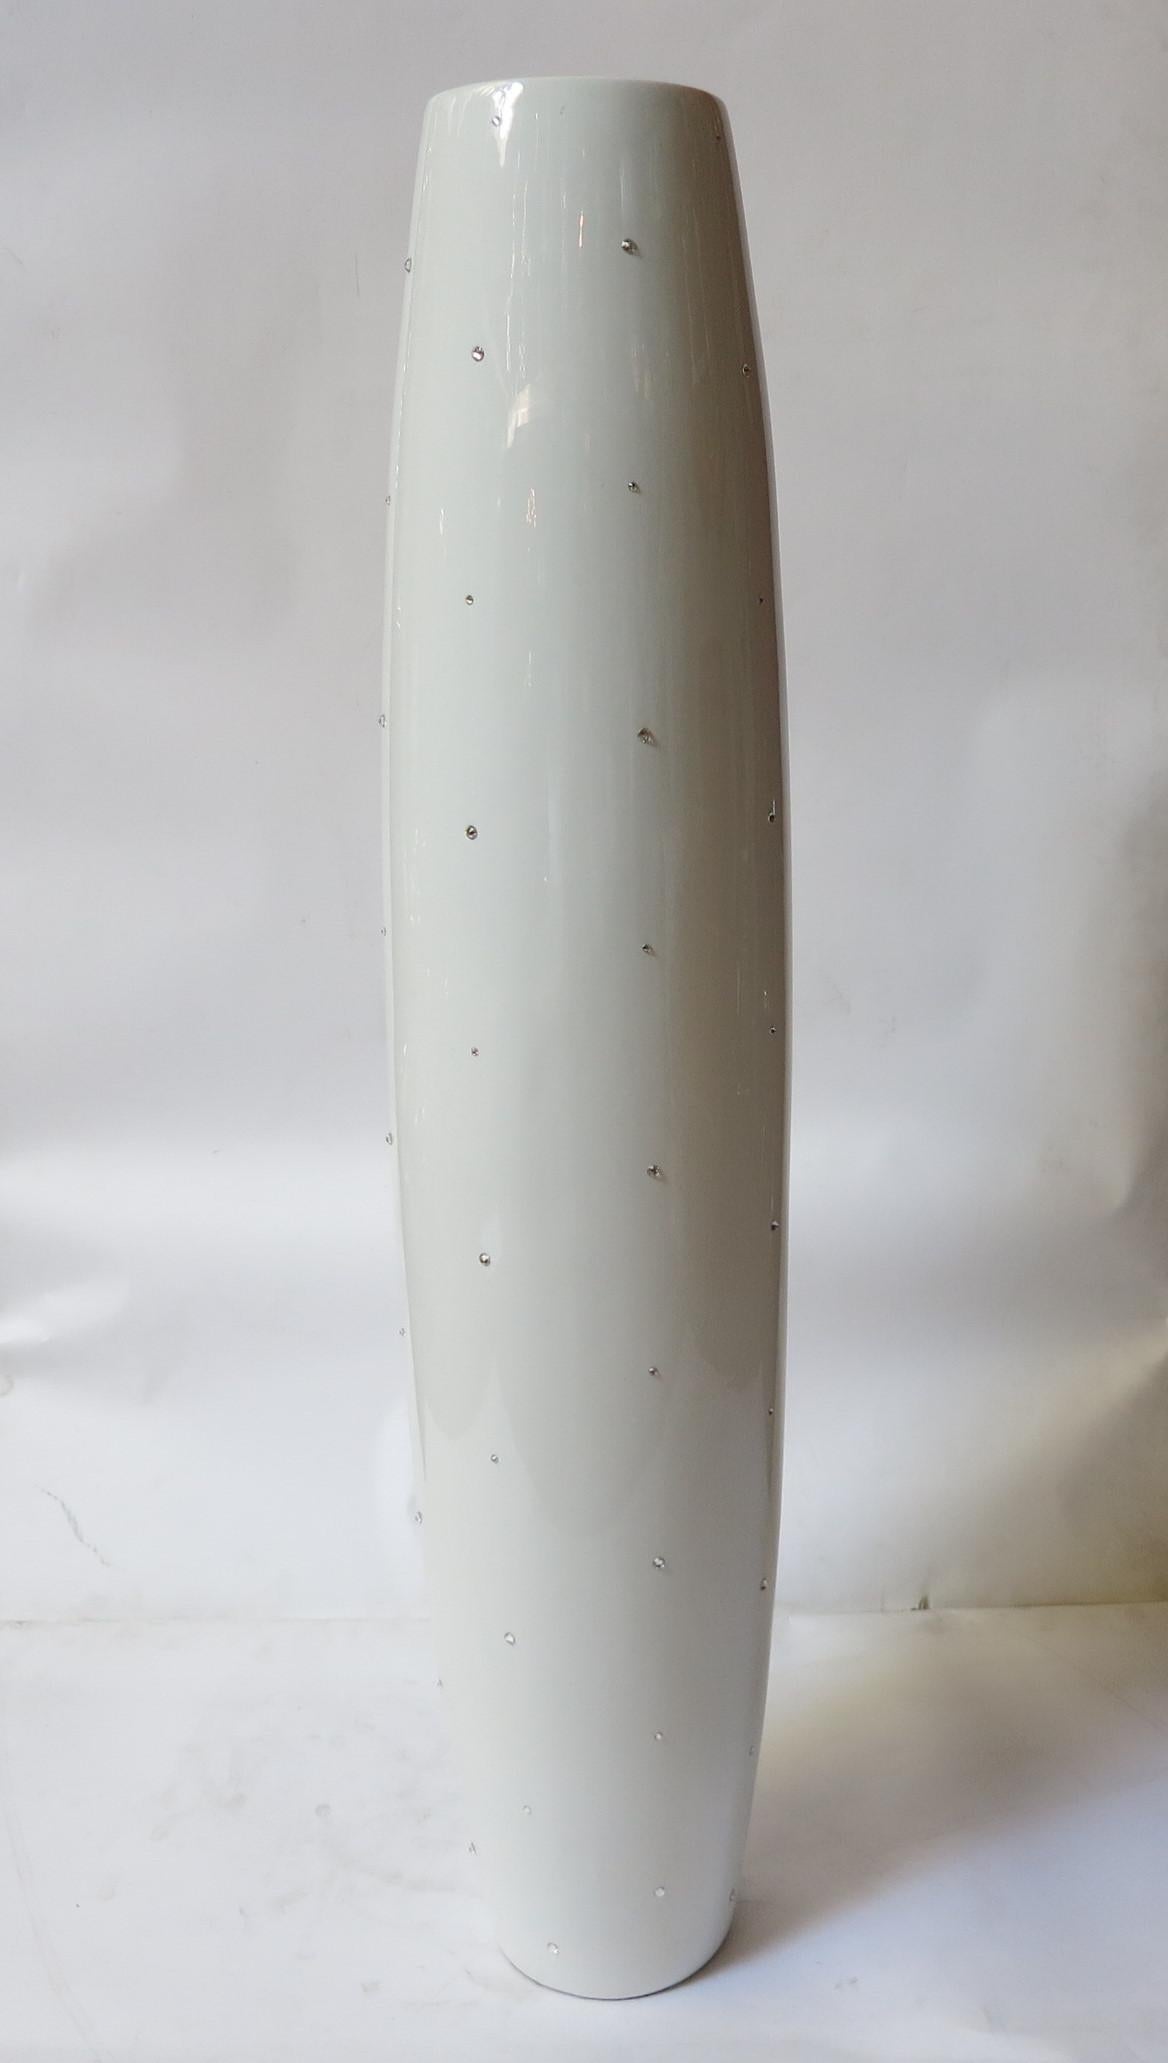 One of a kind white ceramic vase with Swarovski crystals / Designed by Fabio Bergomi / Made in Italy 
Height: 45.5 inches / Diameter: 9 inches 
1 in stock in Palm Springs currently ON FINAL CLEARANCE SALE for $999!!! 
This piece makes for a great